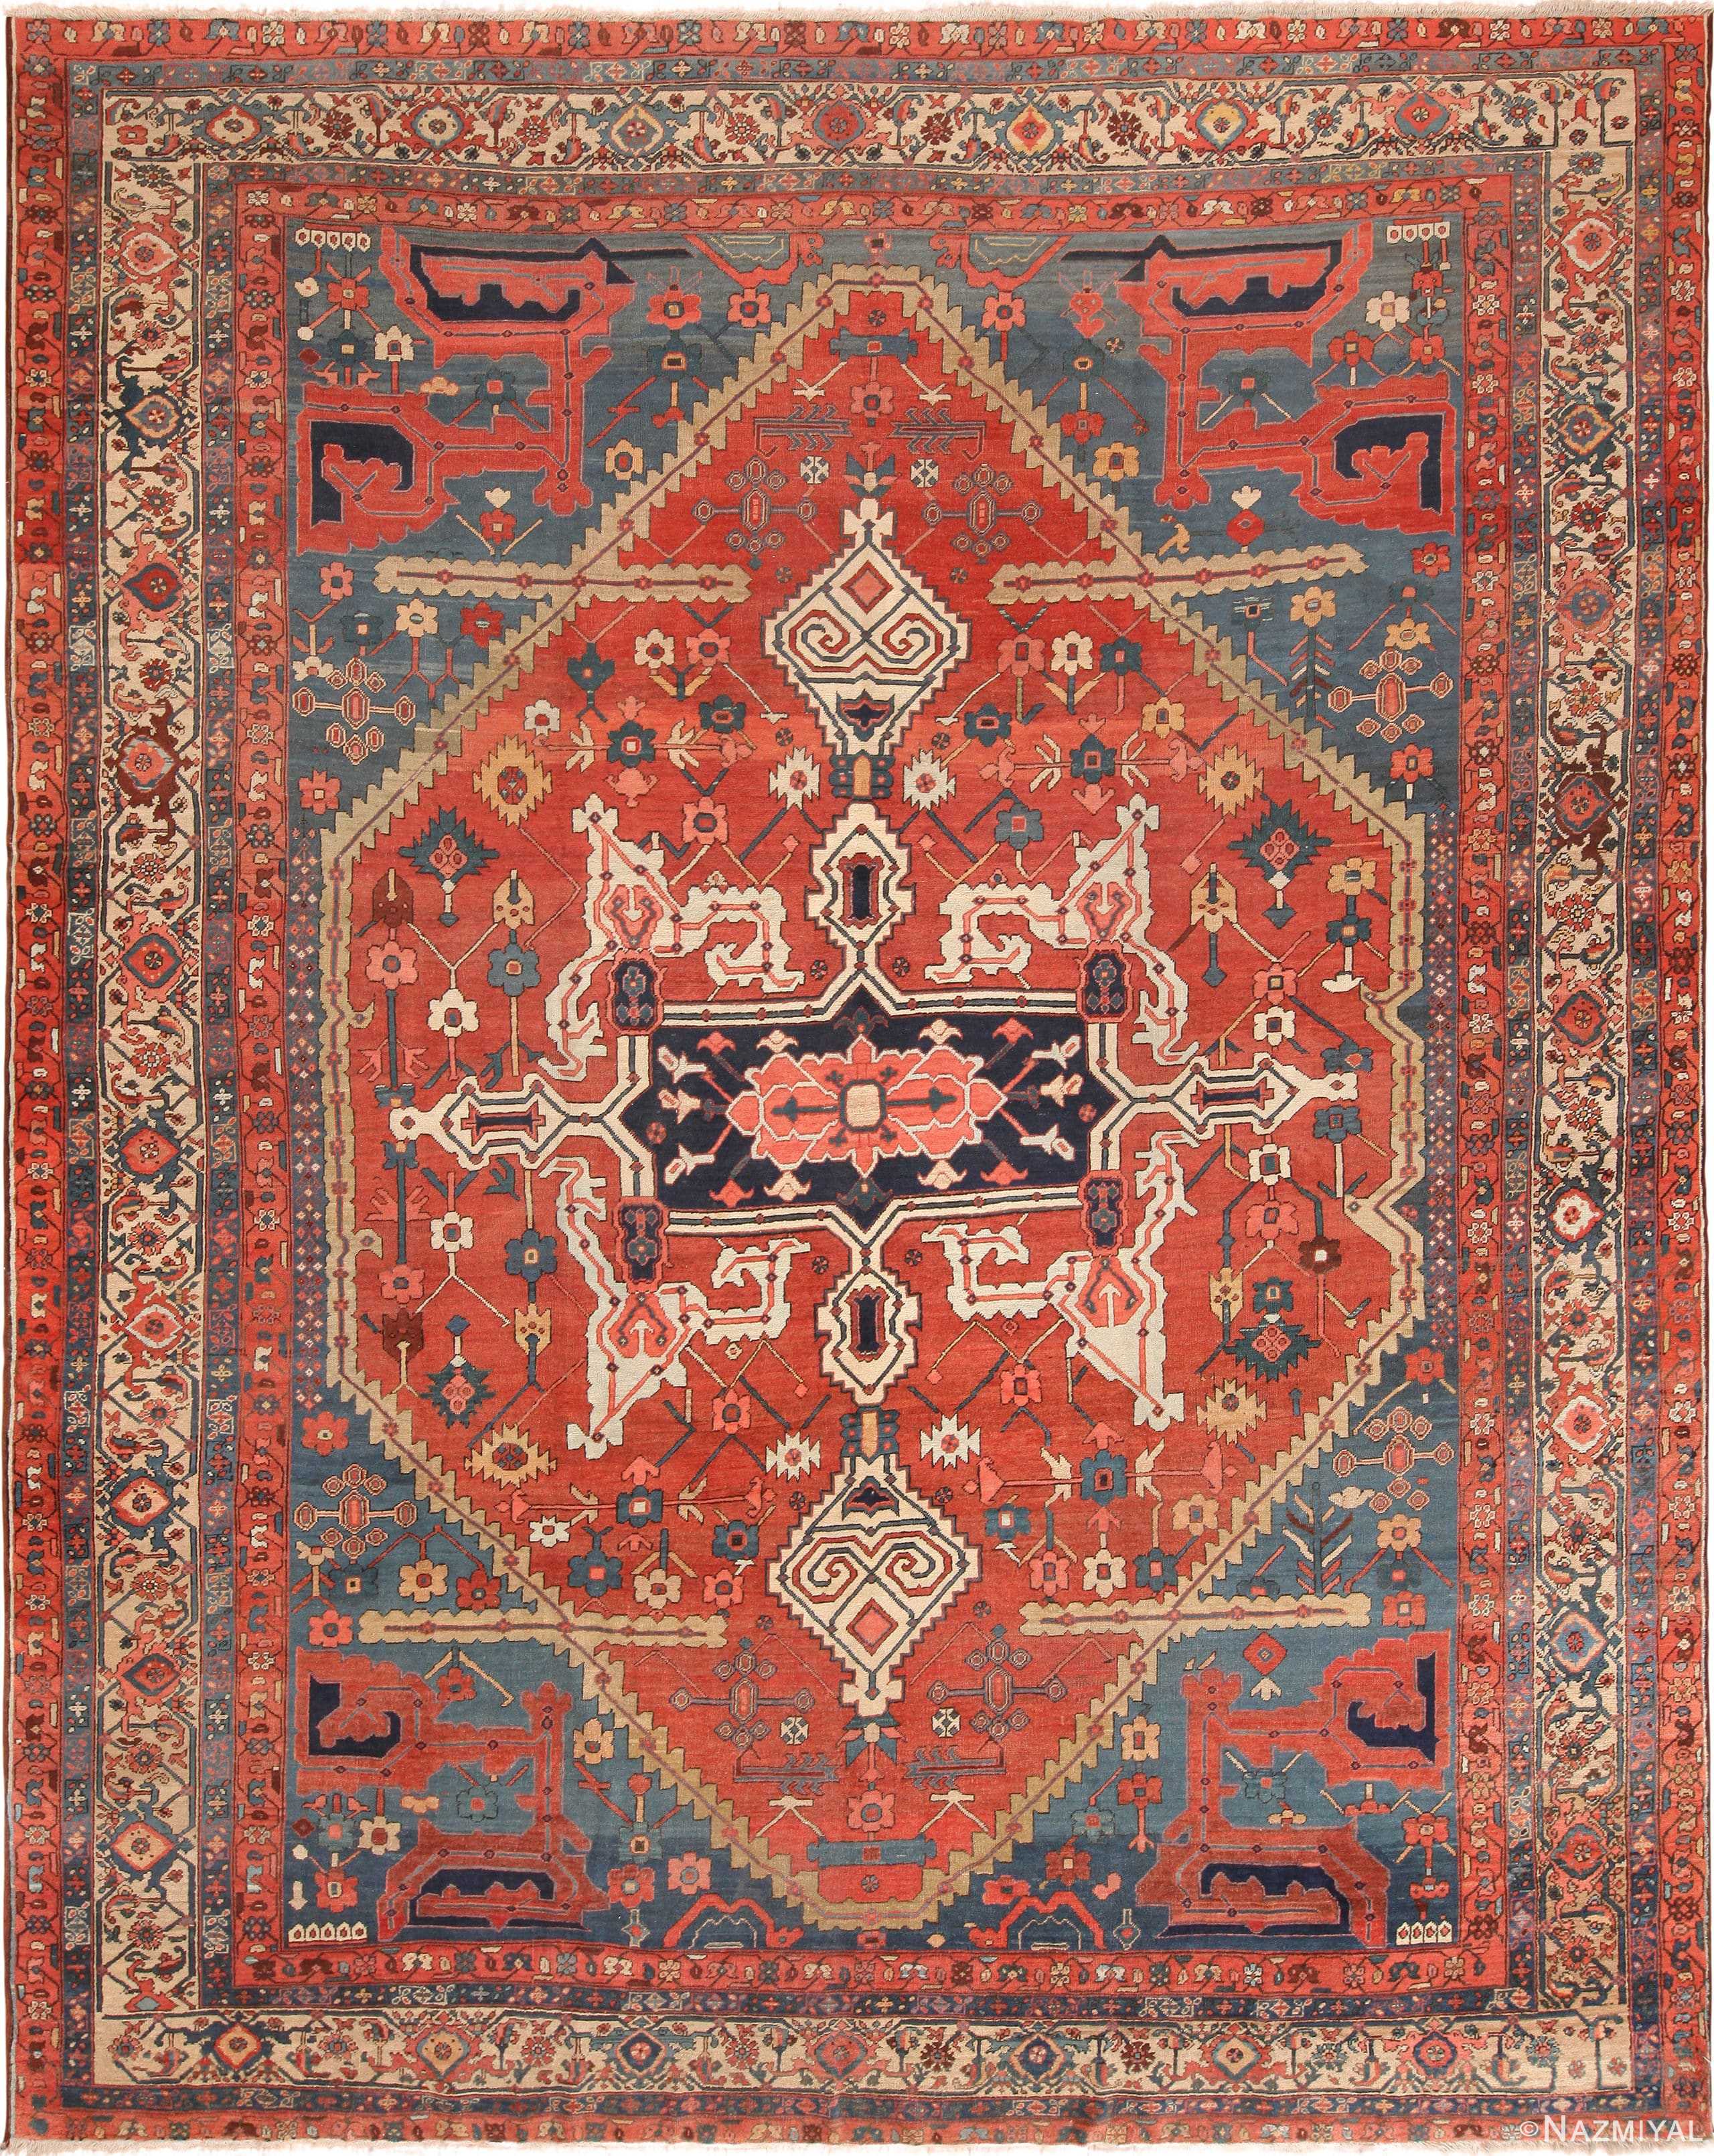 Antique Persian Serapi Area Rug 71126 by Nazmiyal Antique Rugs